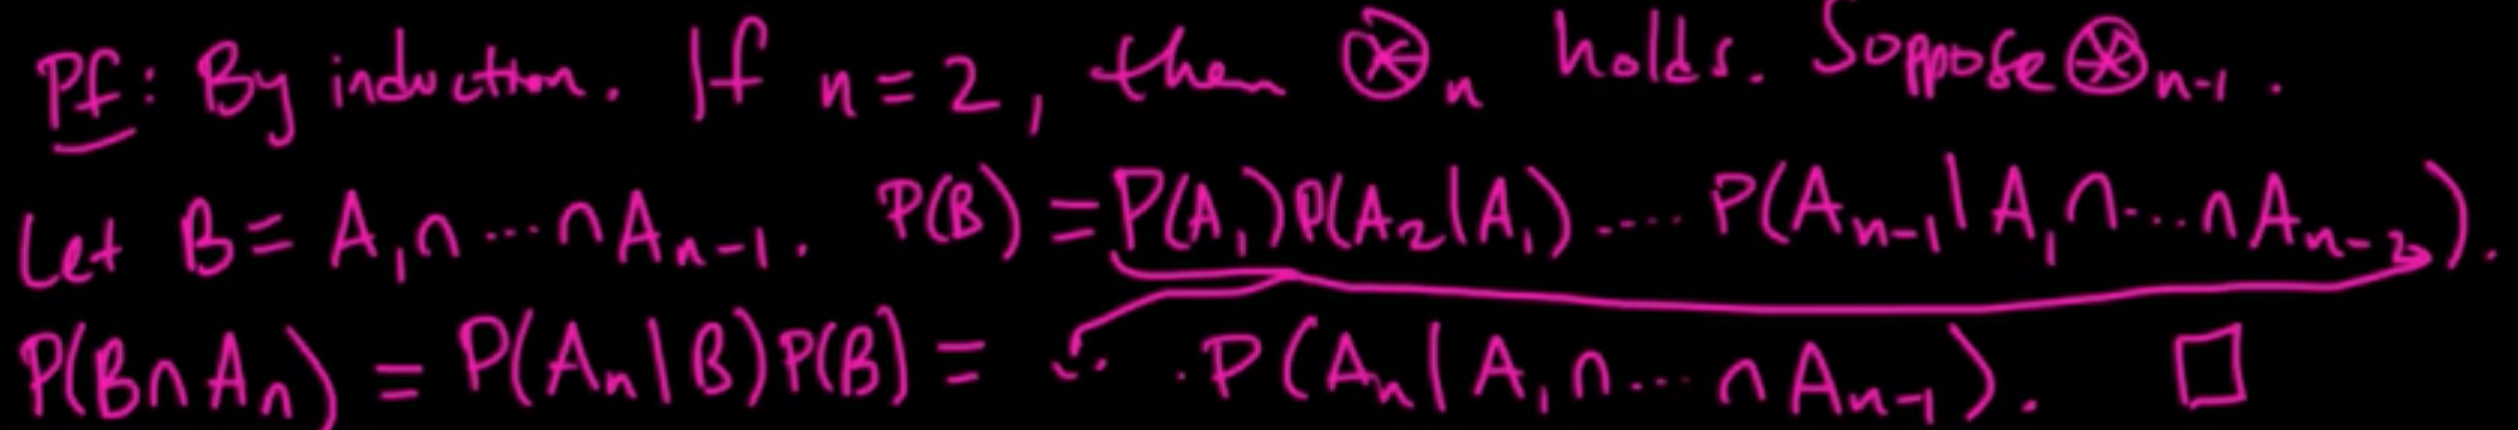 Proof: The chain rule